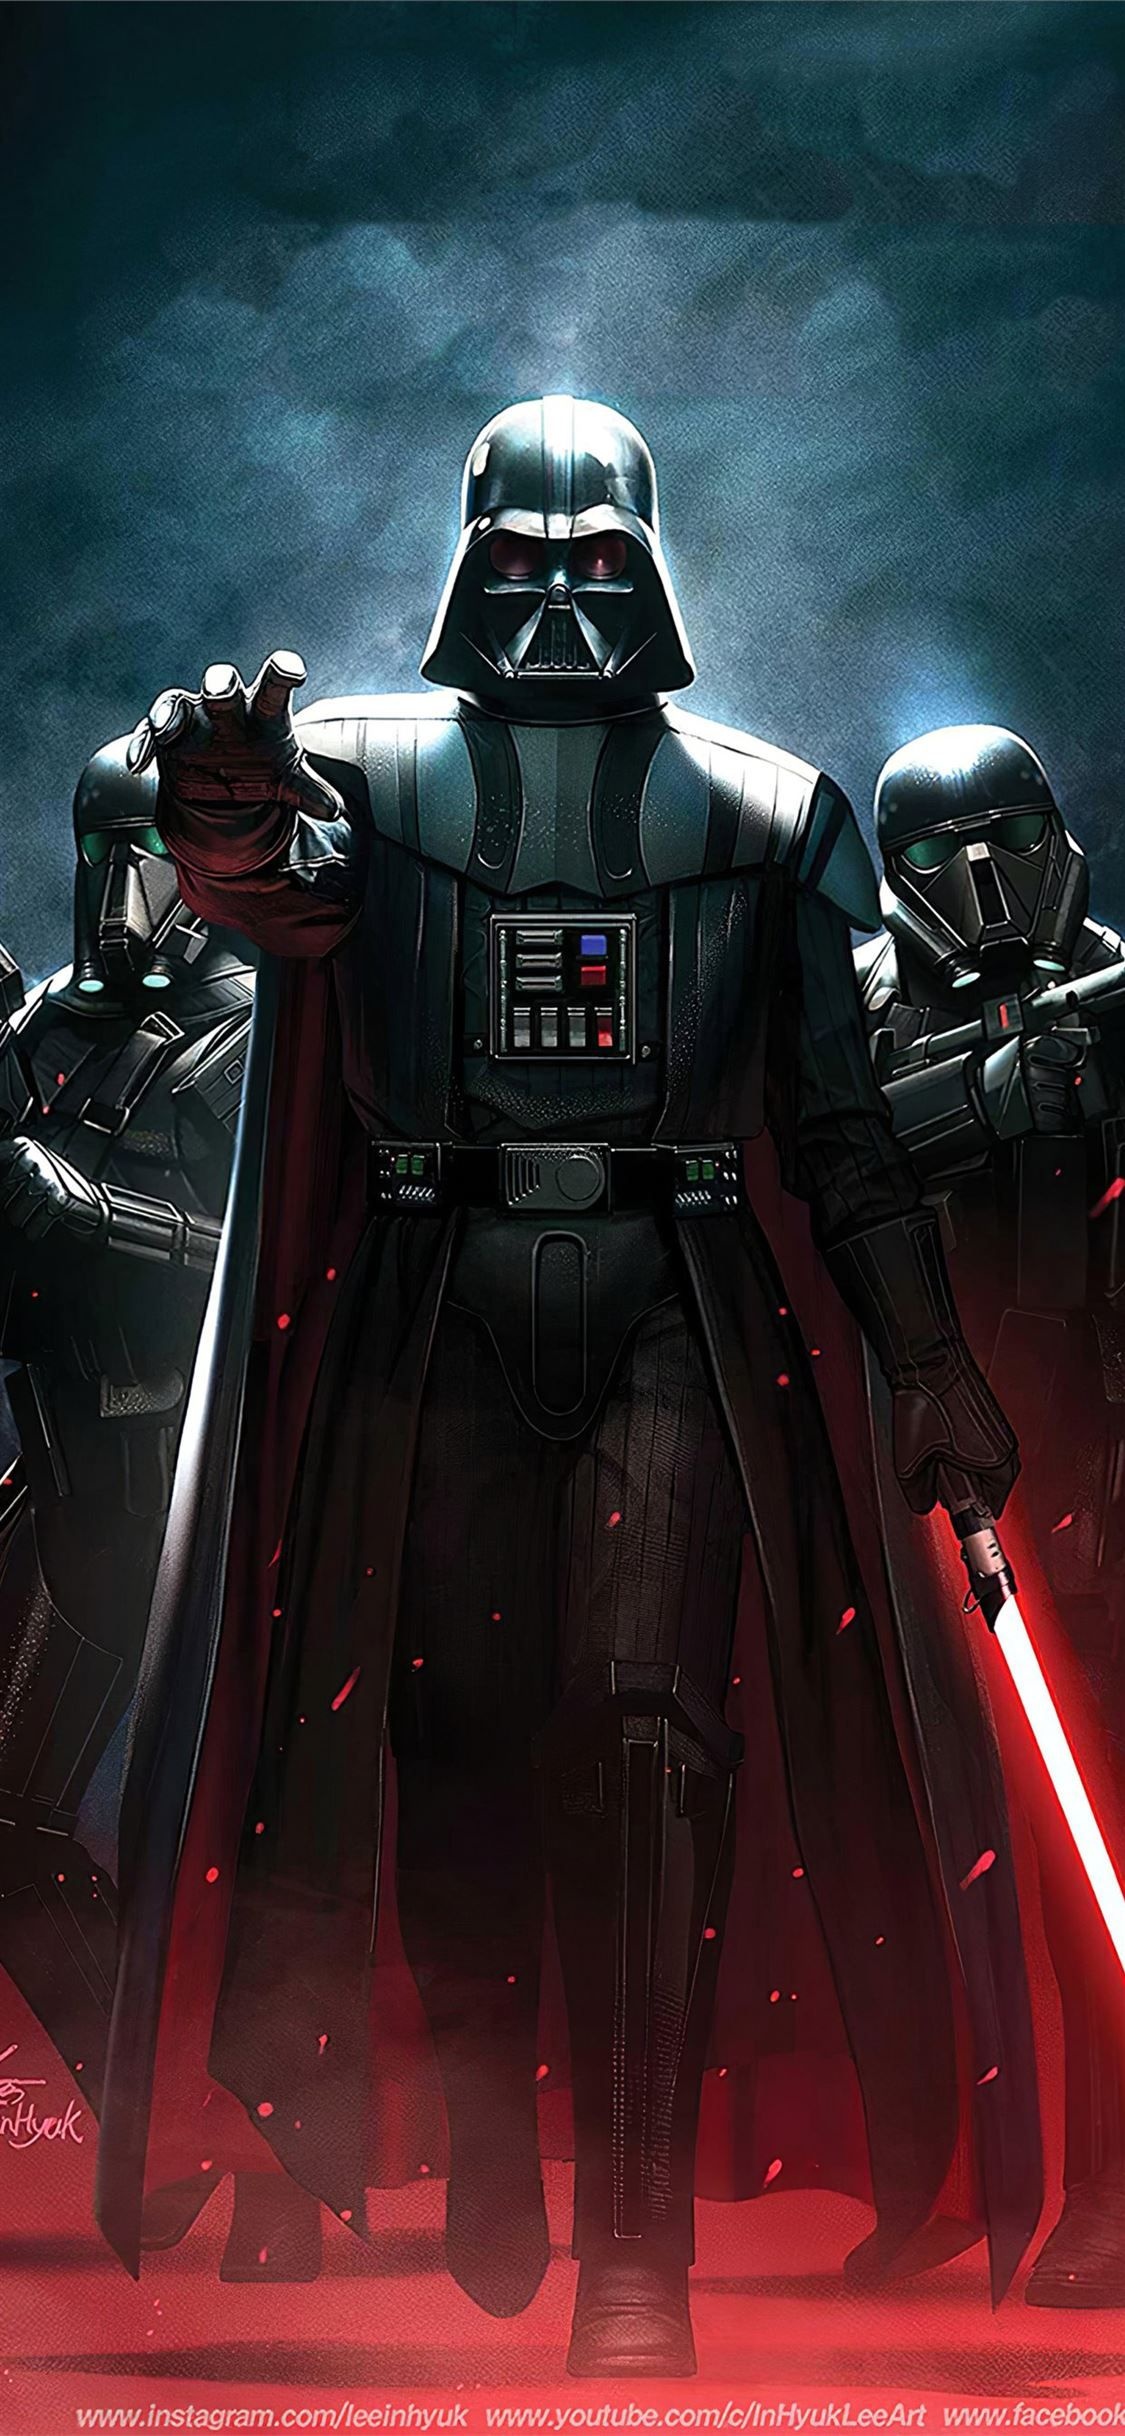 Darth Vader: Star Wars, Personally killed both fully trained Jedi and novice younglings alike. 1130x2440 HD Wallpaper.